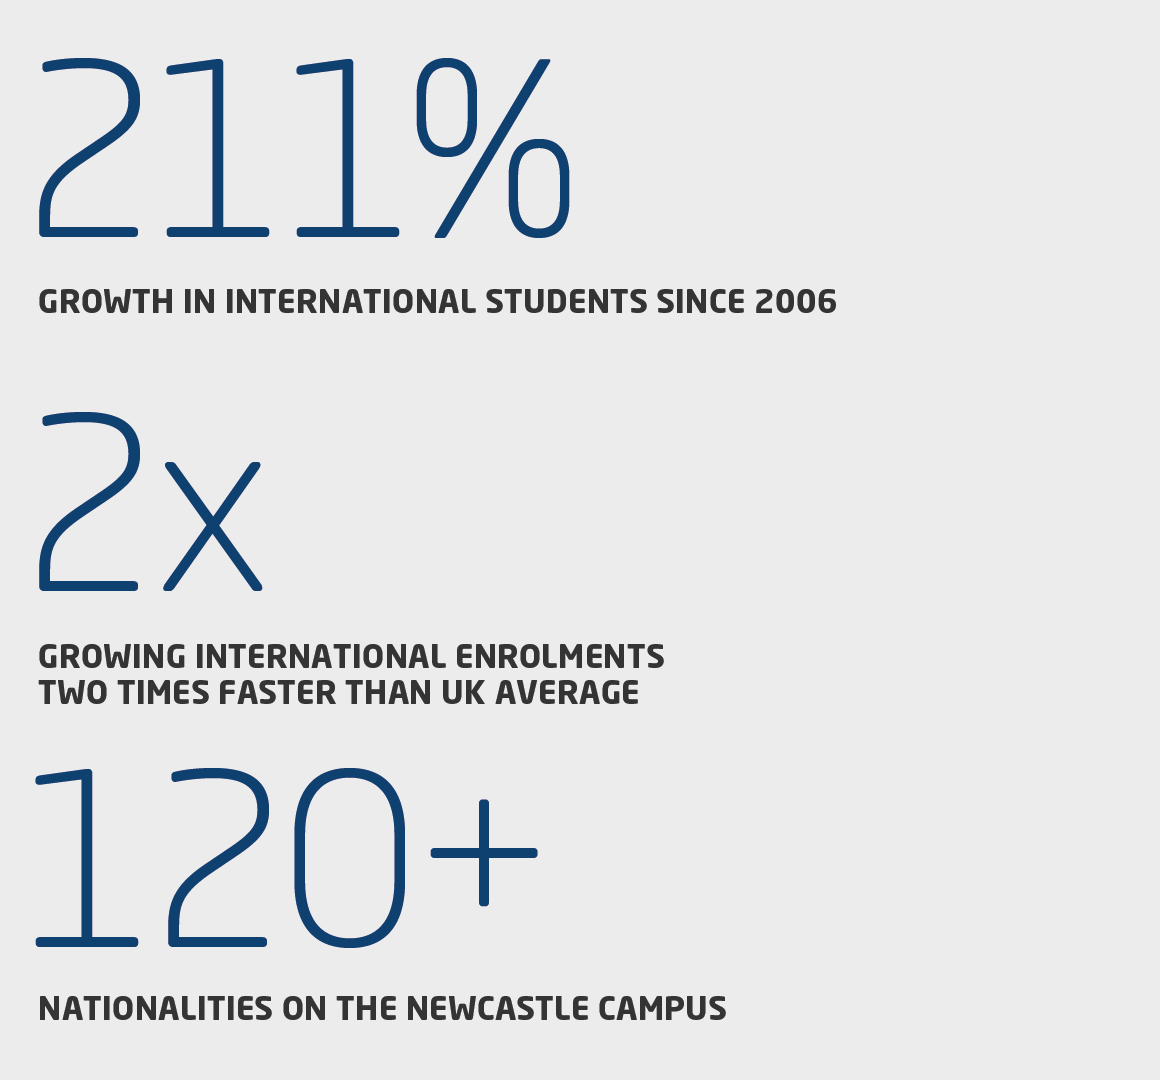 Infographic showing 211% growth in international students at Newcastle University since 2006—double the growth of the average UK university—with 120+ nationalities on the Newcastle campus.